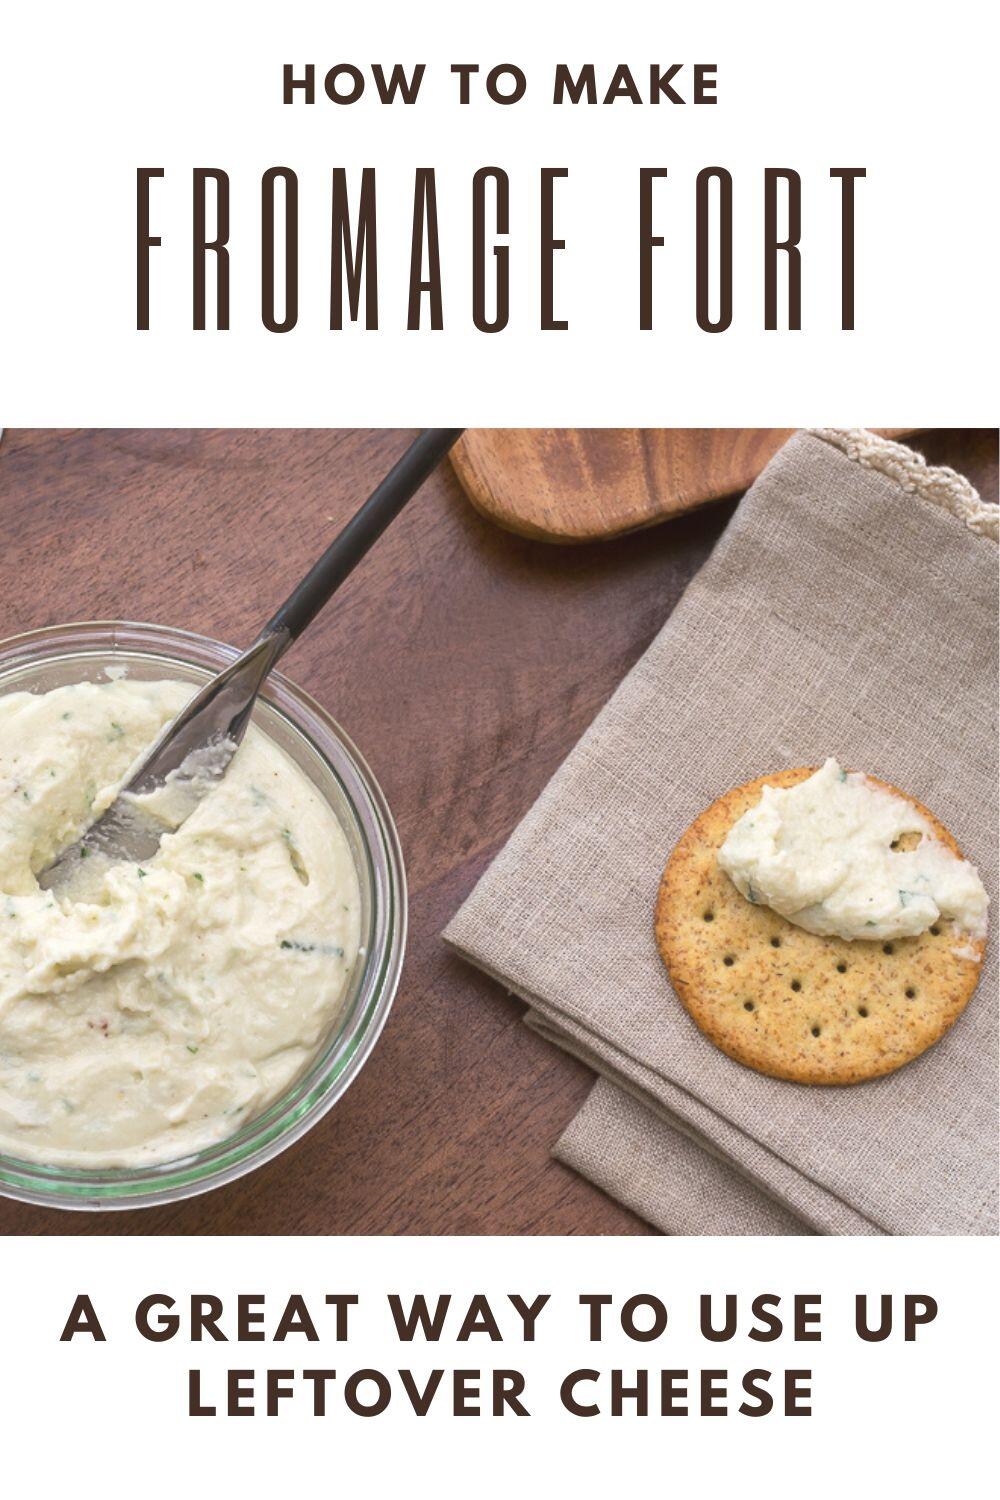 Fromage Fort Recipe: Great Way to Use Up Cheese · Nourish and Nestle